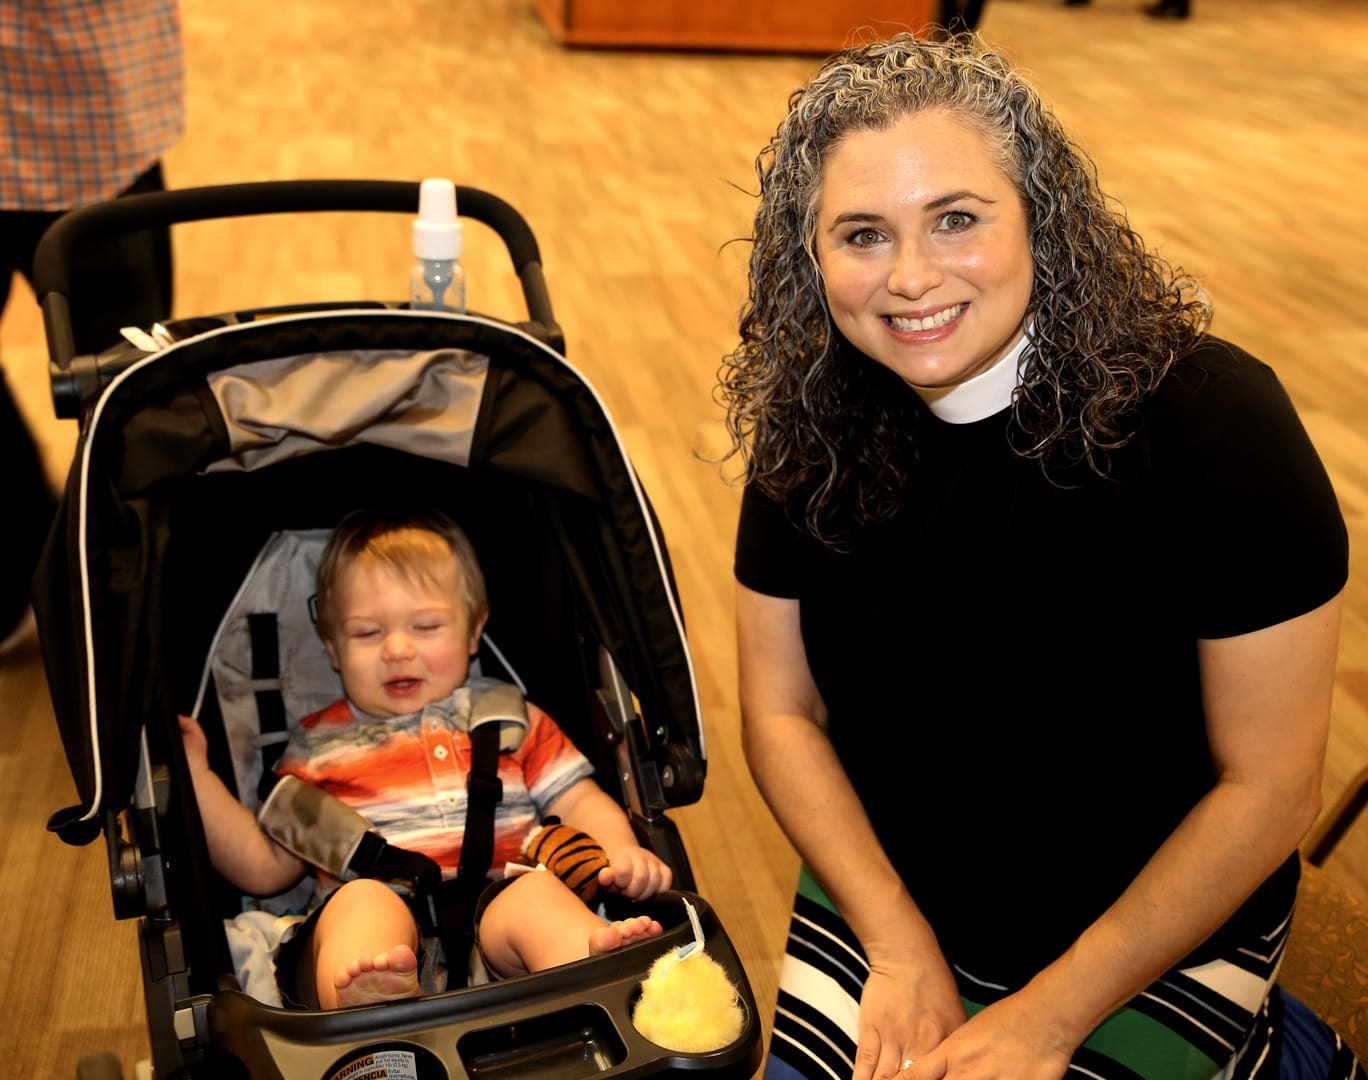 A woman poses with a baby in a stroller.